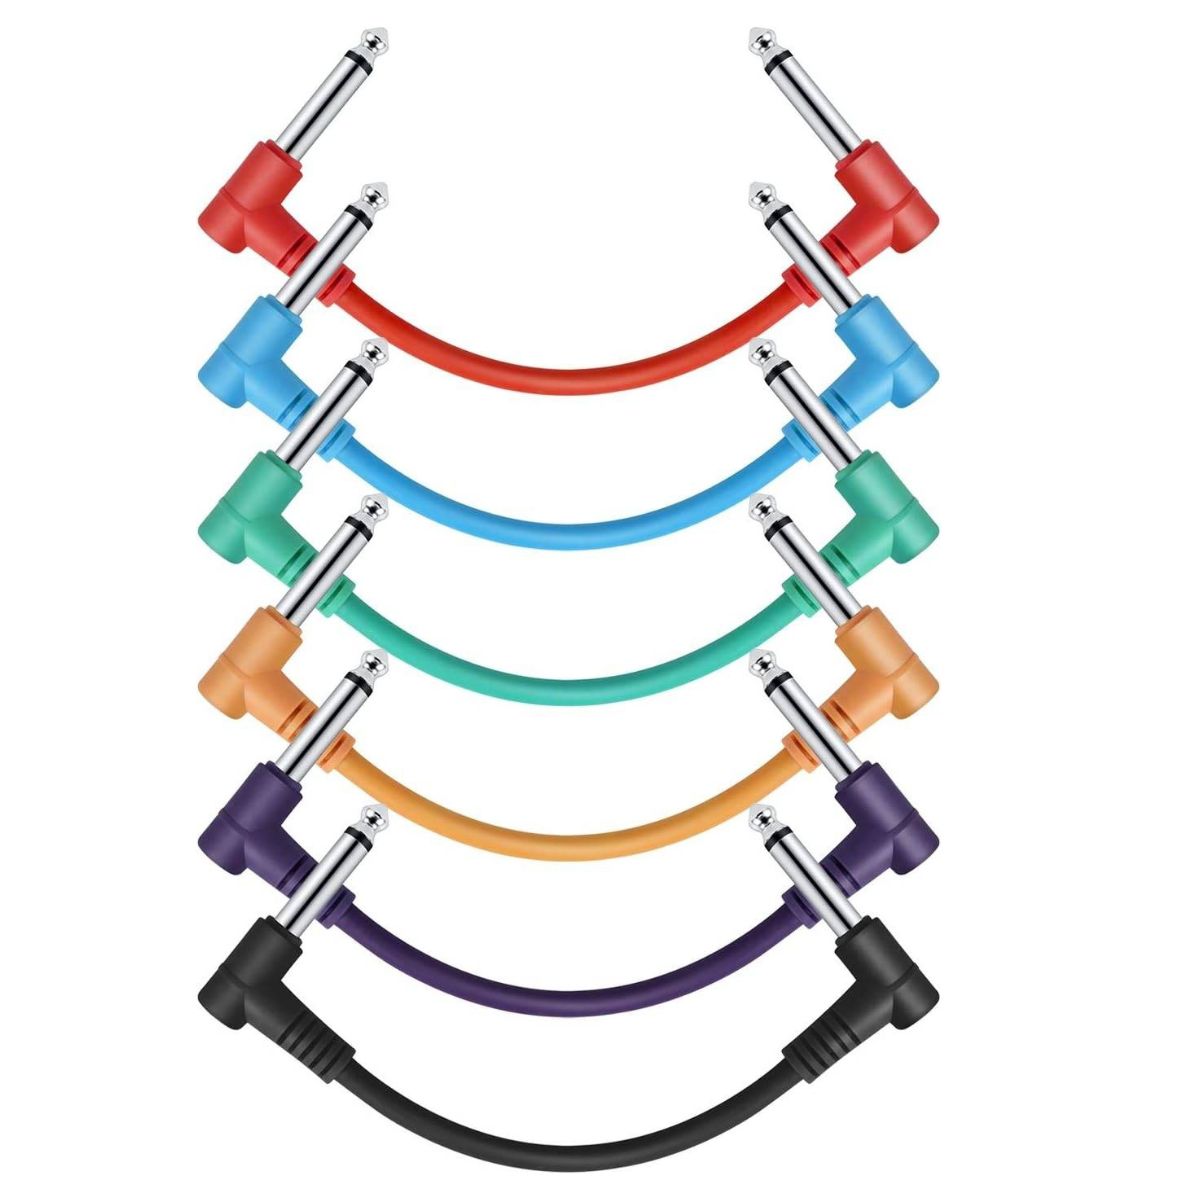 Donner – EC2009 6 Inch Guitar Patch Cable Colored cable 6-Pack